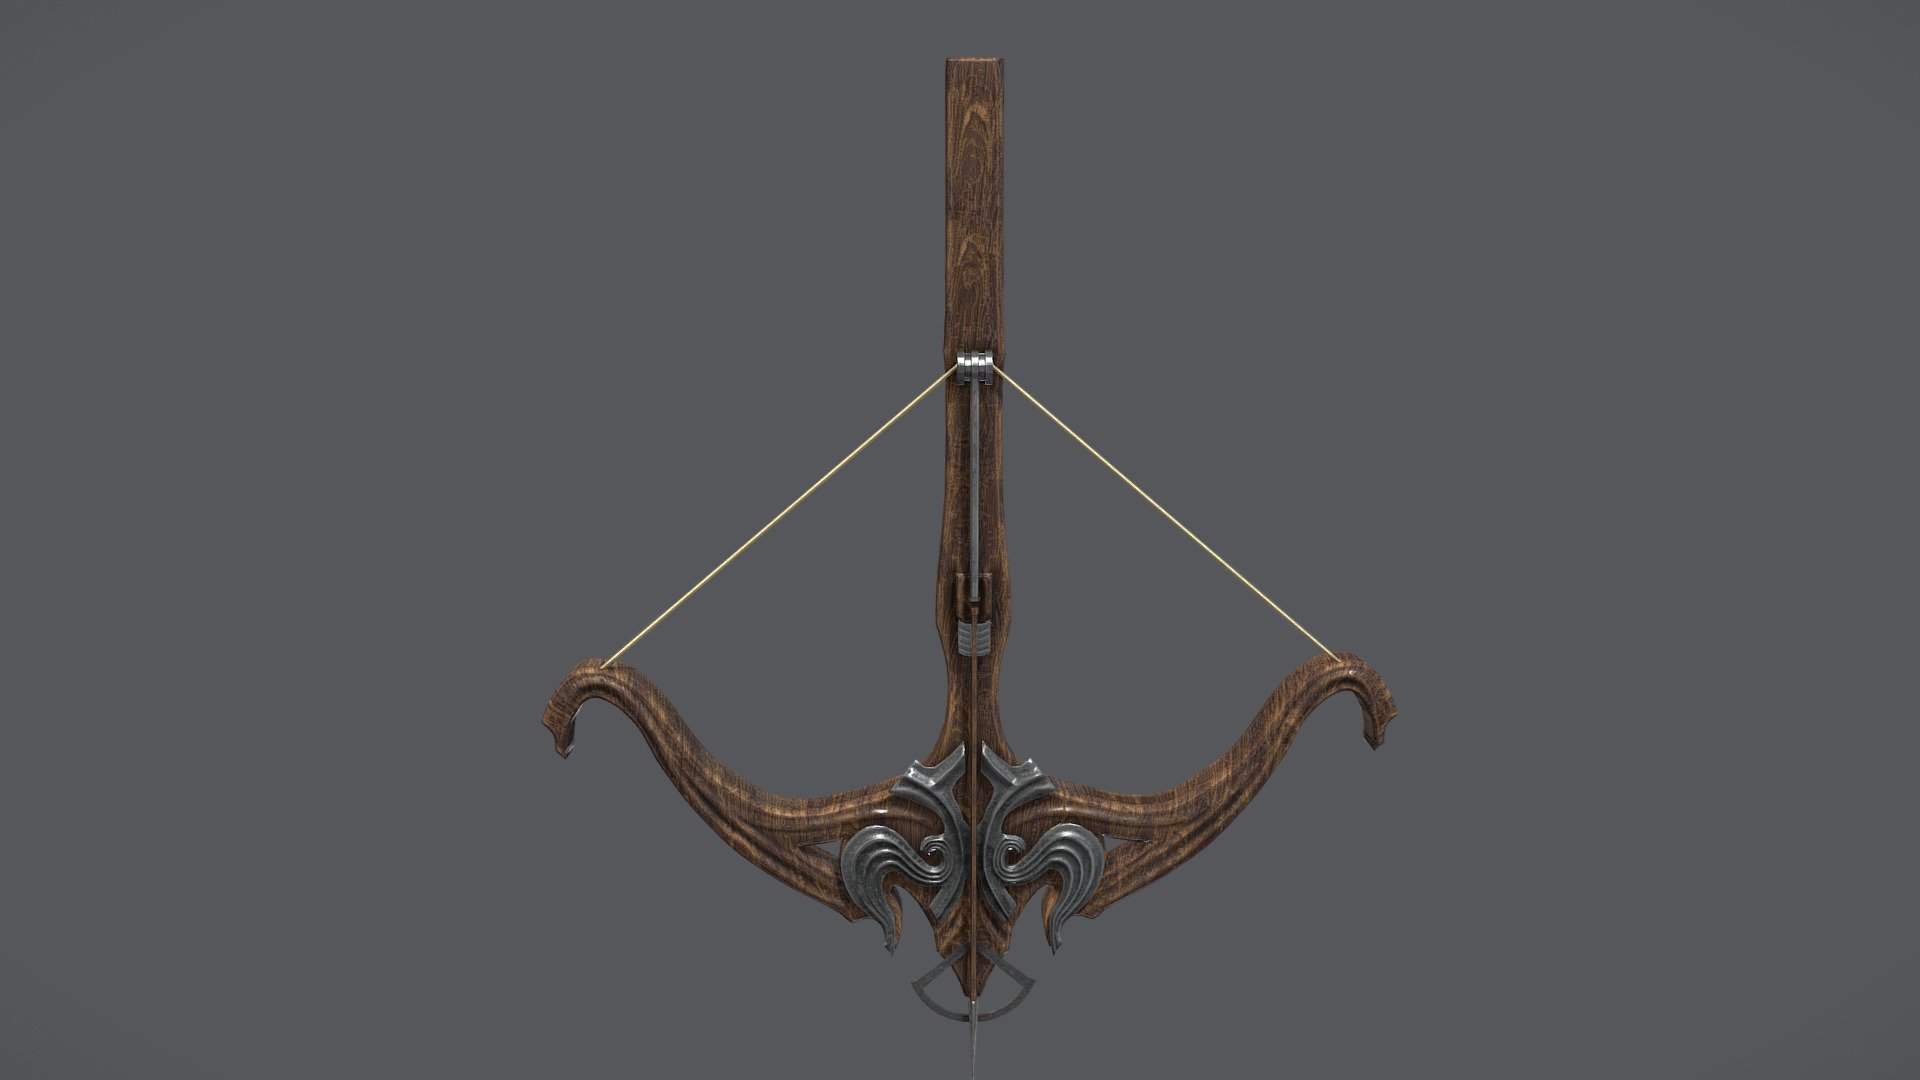 Dual Wield Medieval Fantasy Cross Bow

Clean topology

No overlapping smart optimized unwrapped UVs

High-quality realistic textures

FBX, OBJ, gITF, USDZ (request other formats)

PBR or Classic

Type     user:3dia &ldquo;search term